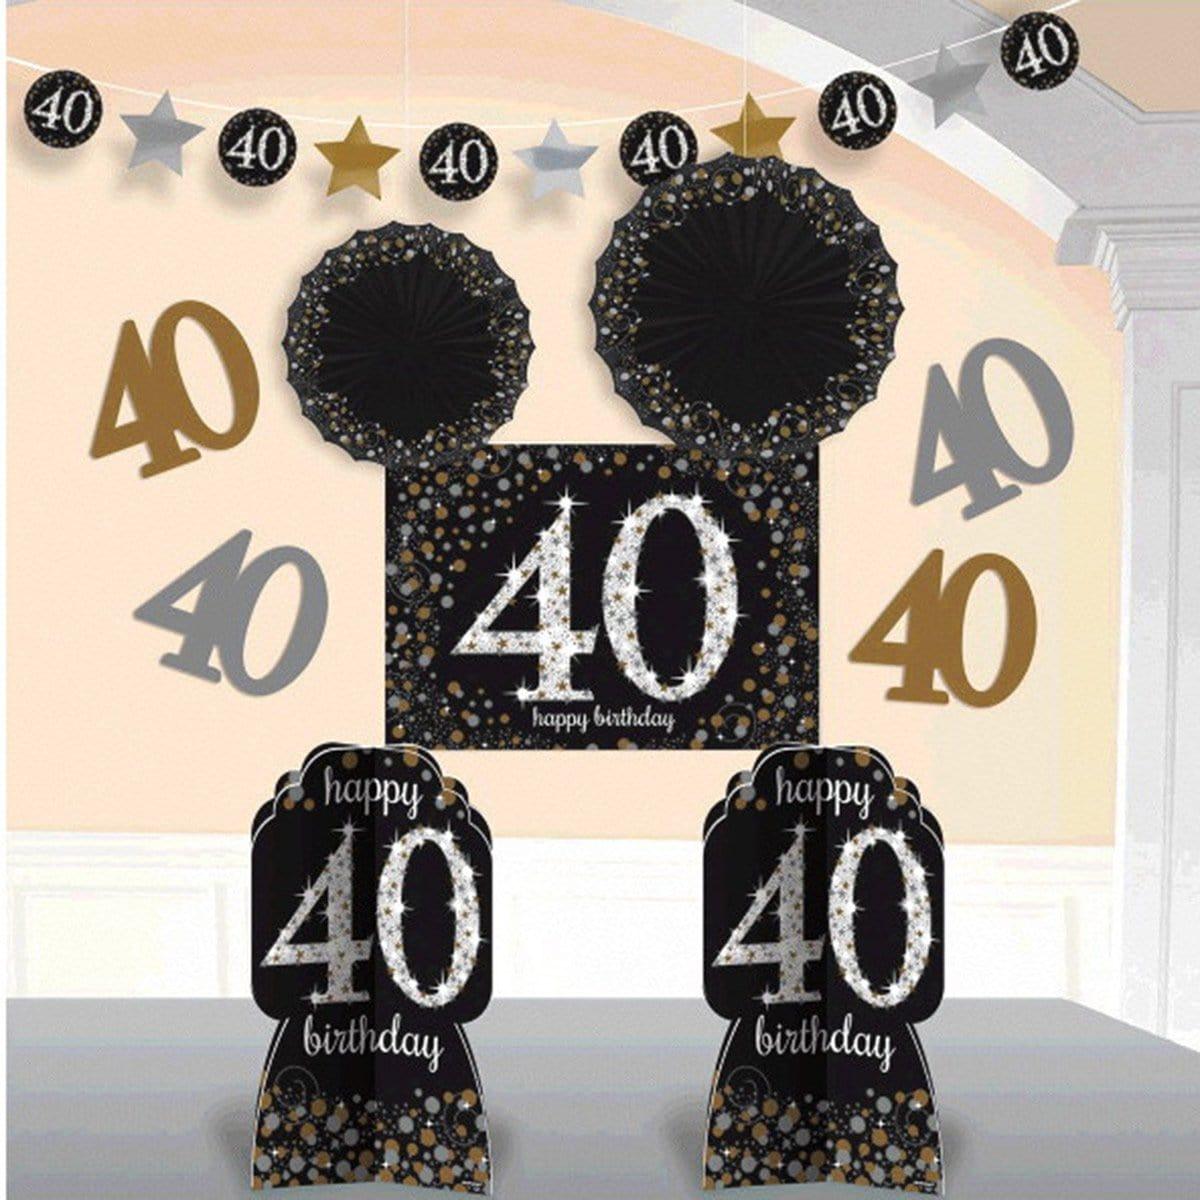 Buy Age Specific Birthday 40th Sparkling Celeb - Room Decorating Kit sold at Party Expert